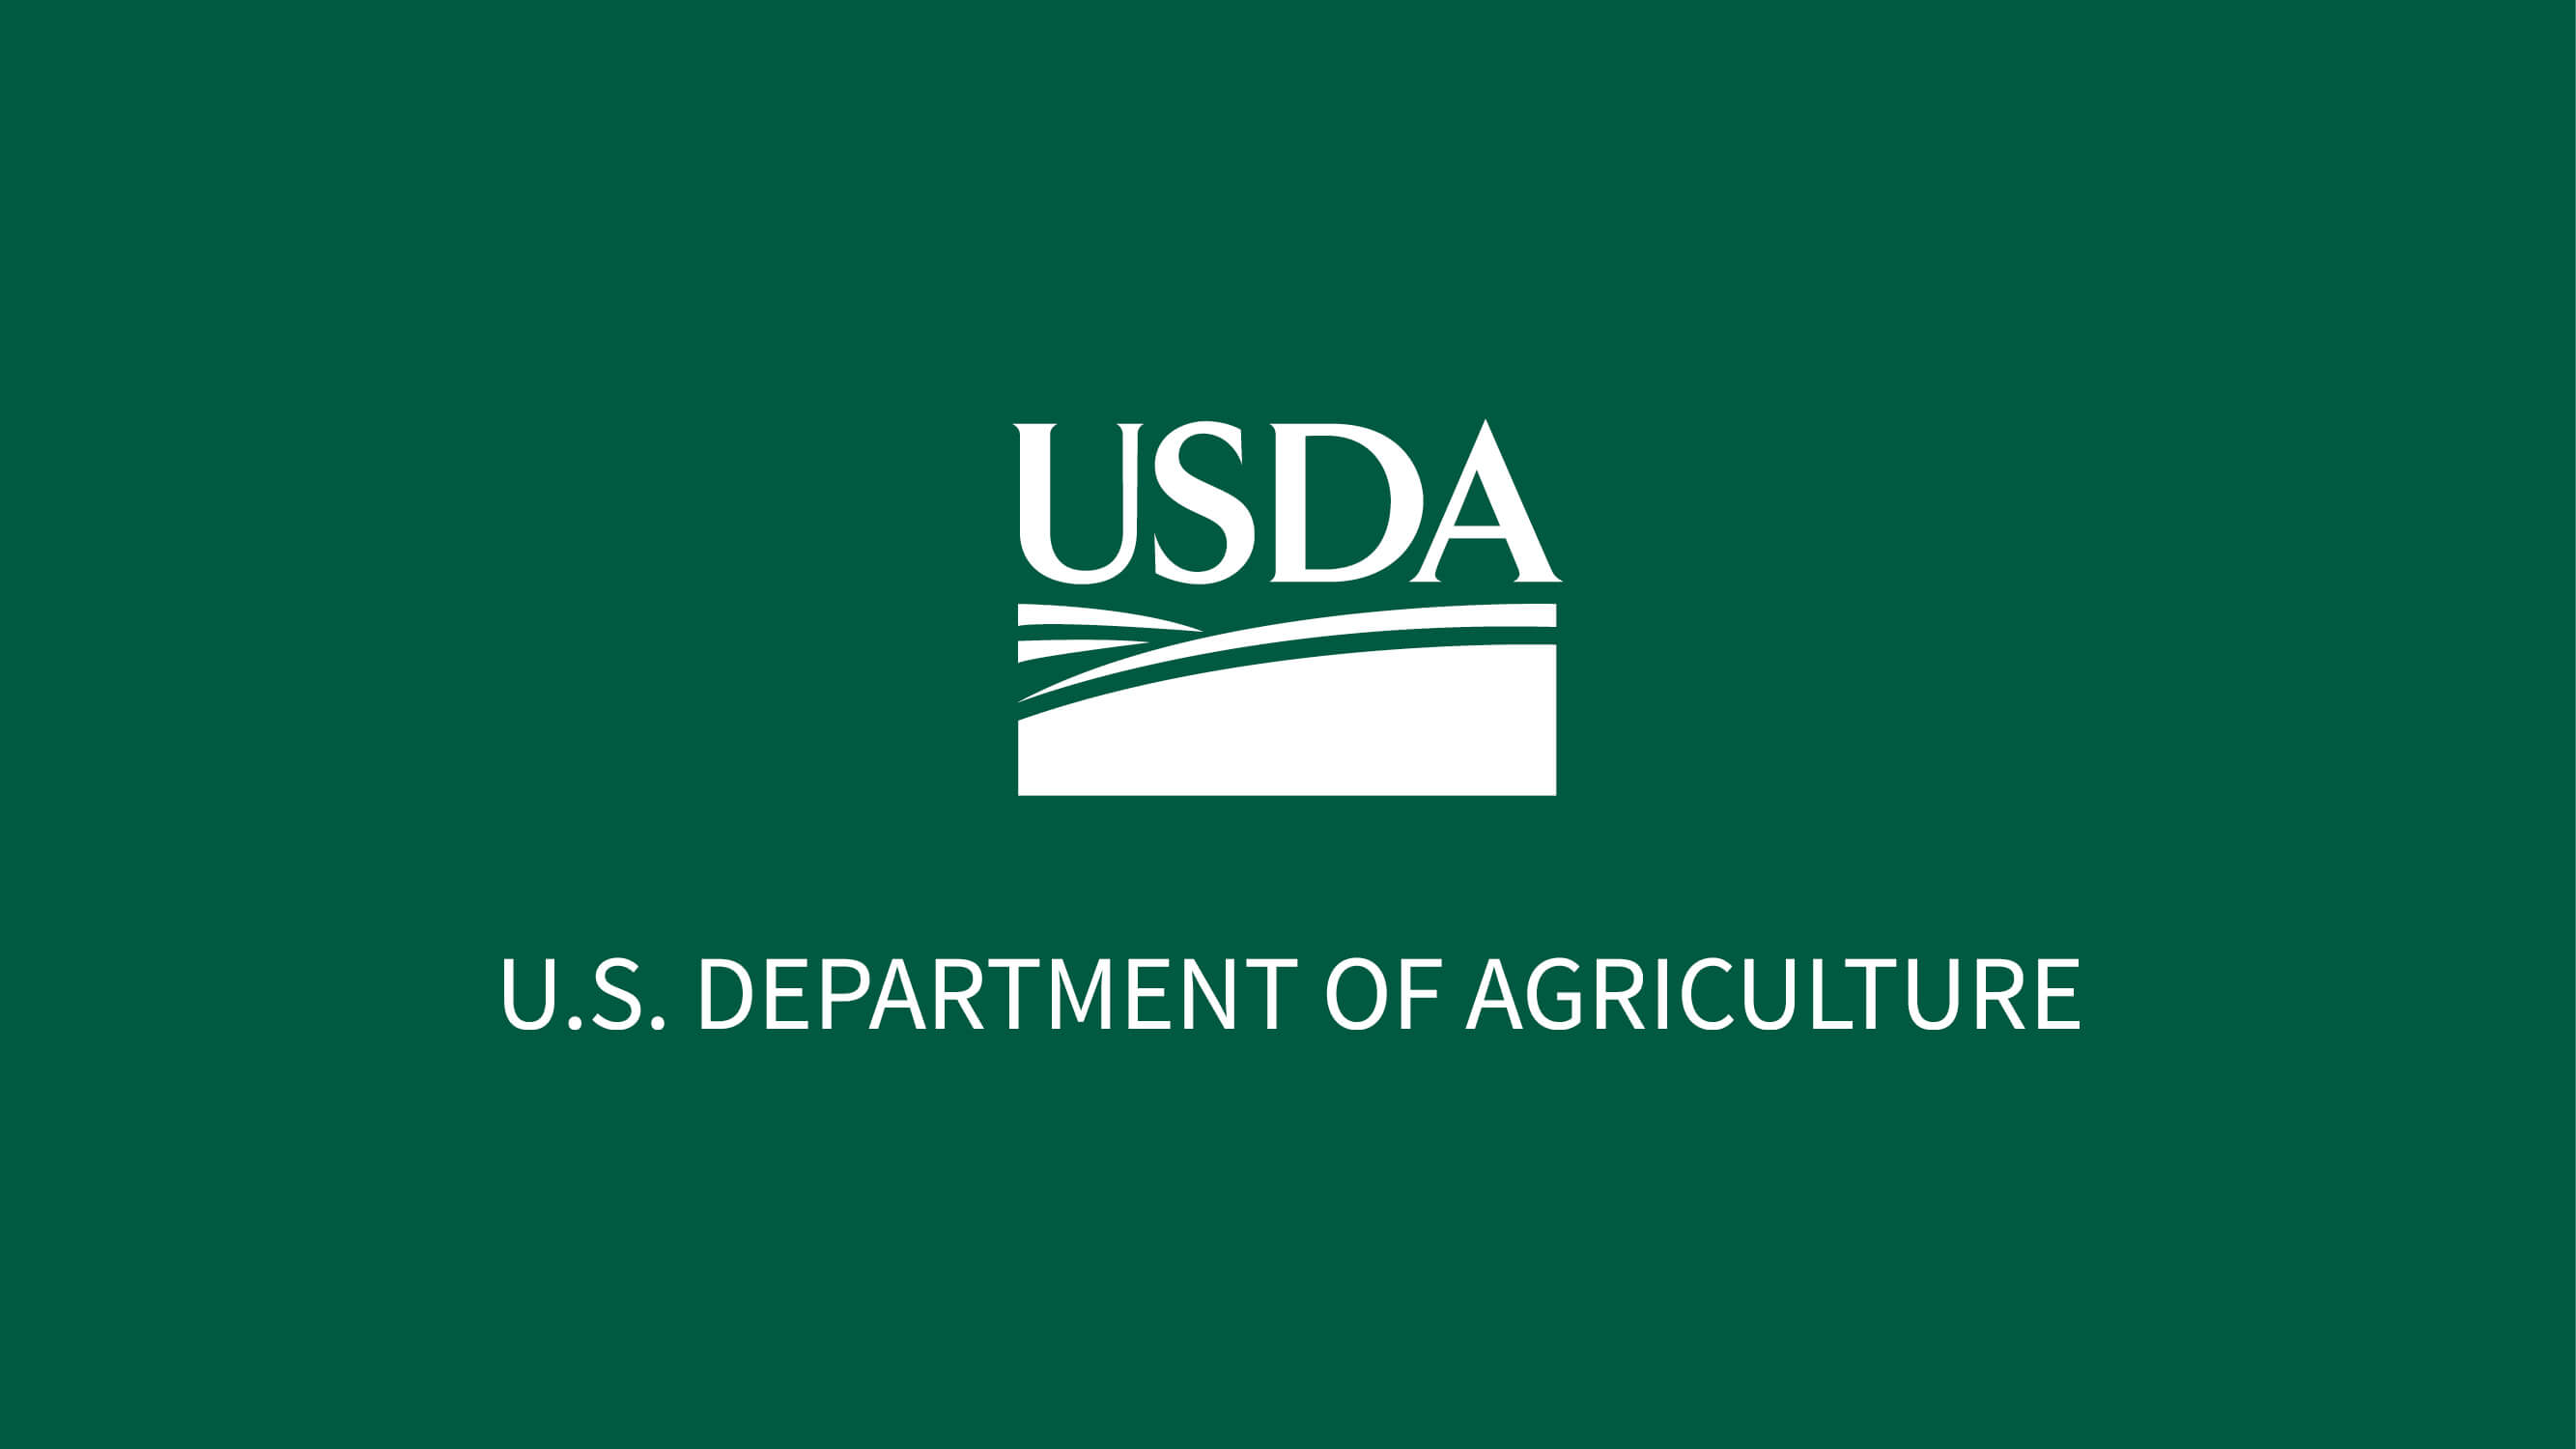 USDA Invests Nearly $2 Billion, Leverages American Agriculture to Feed Kids & Families